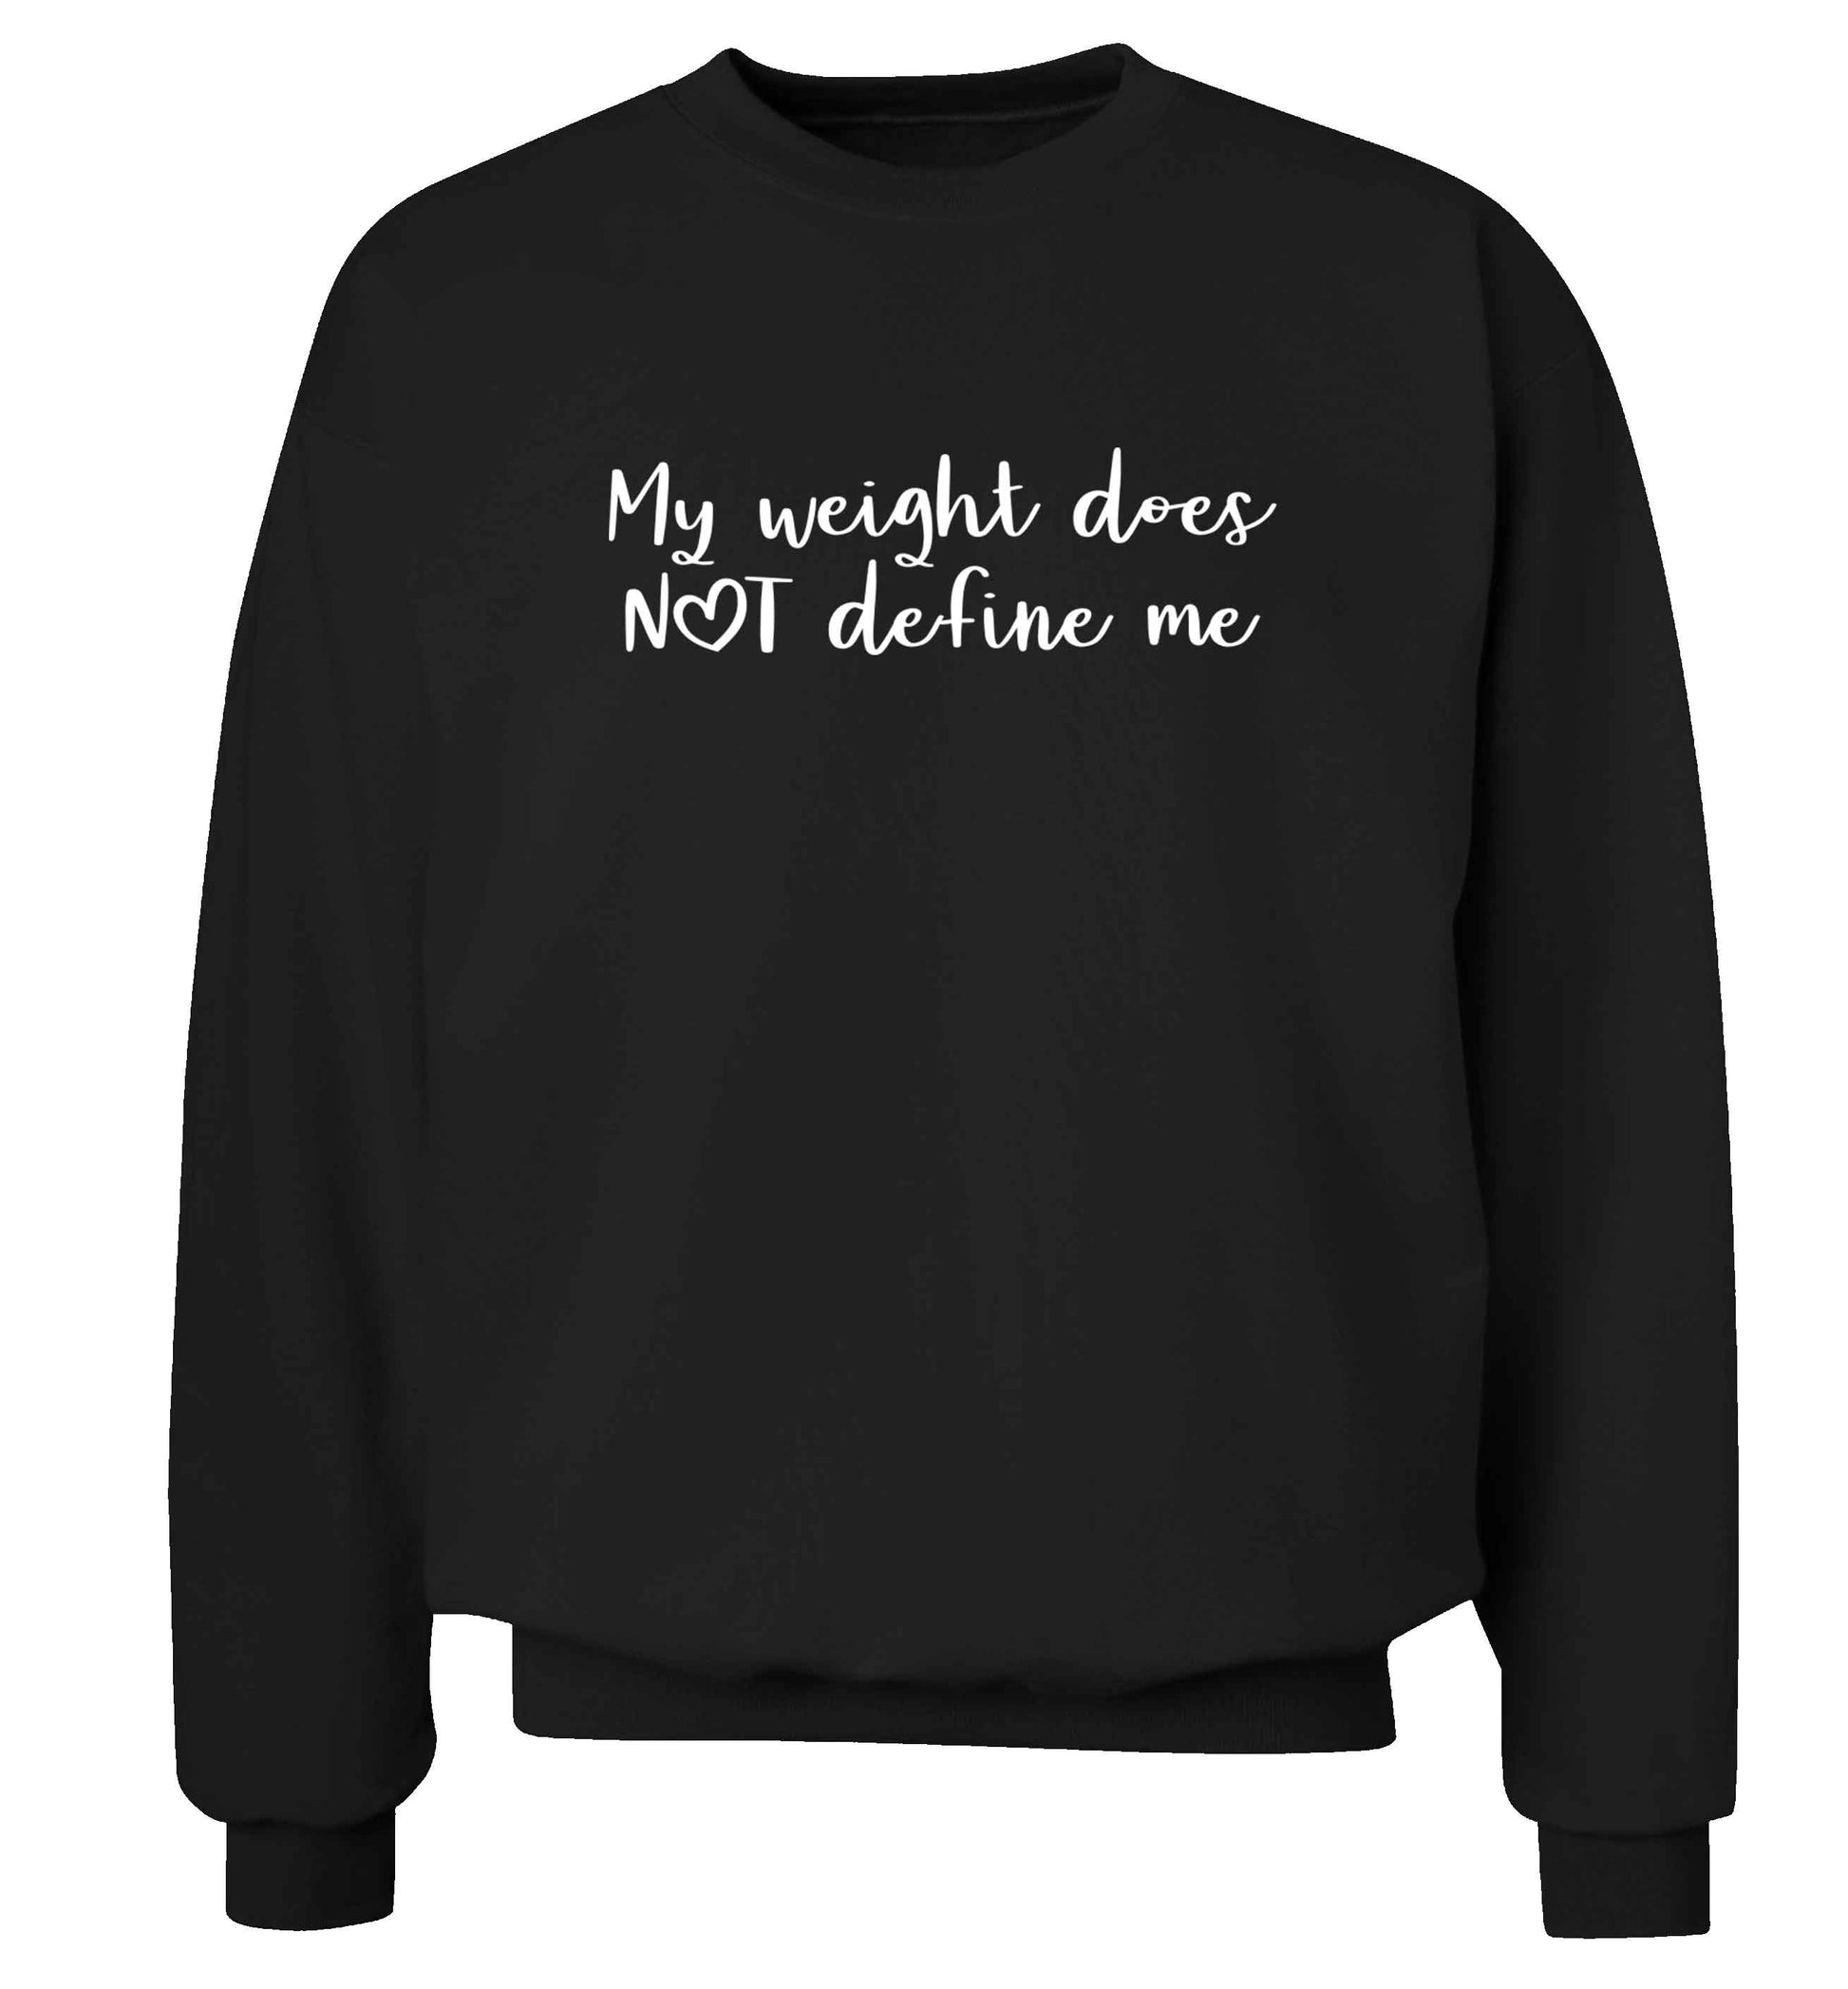 My weight does not define me adult's unisex black sweater 2XL